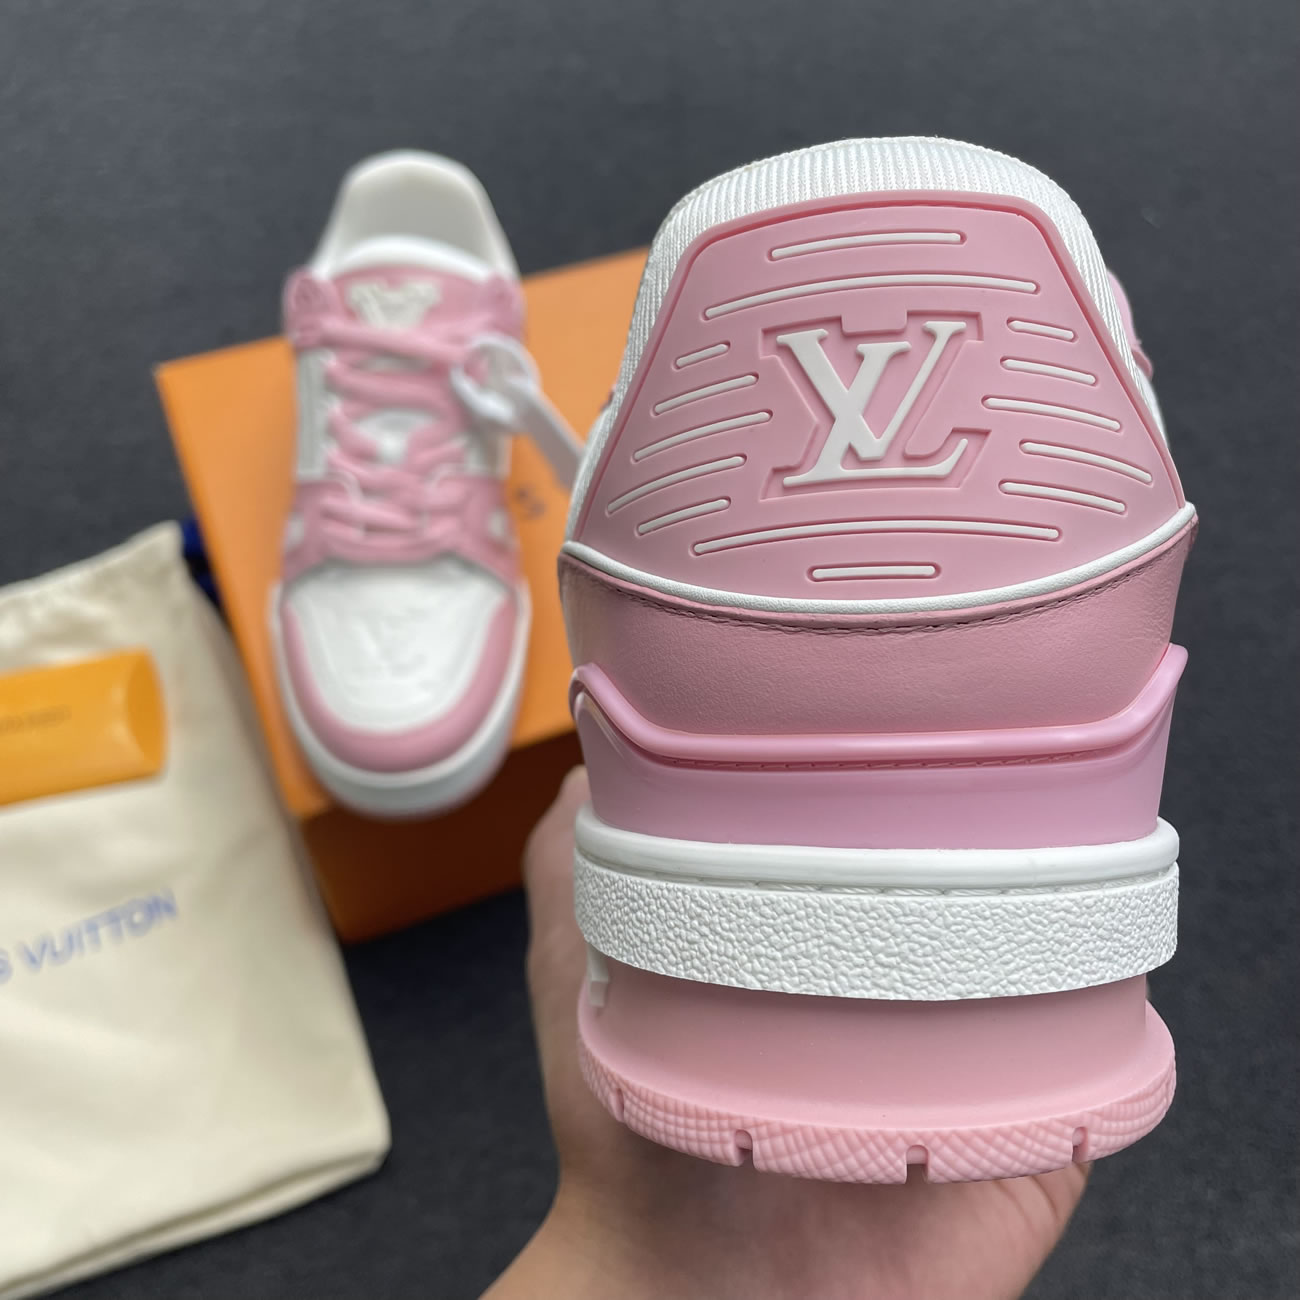 Lv Trainer Vuitton Sneaker Pink 1aa6w3 (6) - newkick.org